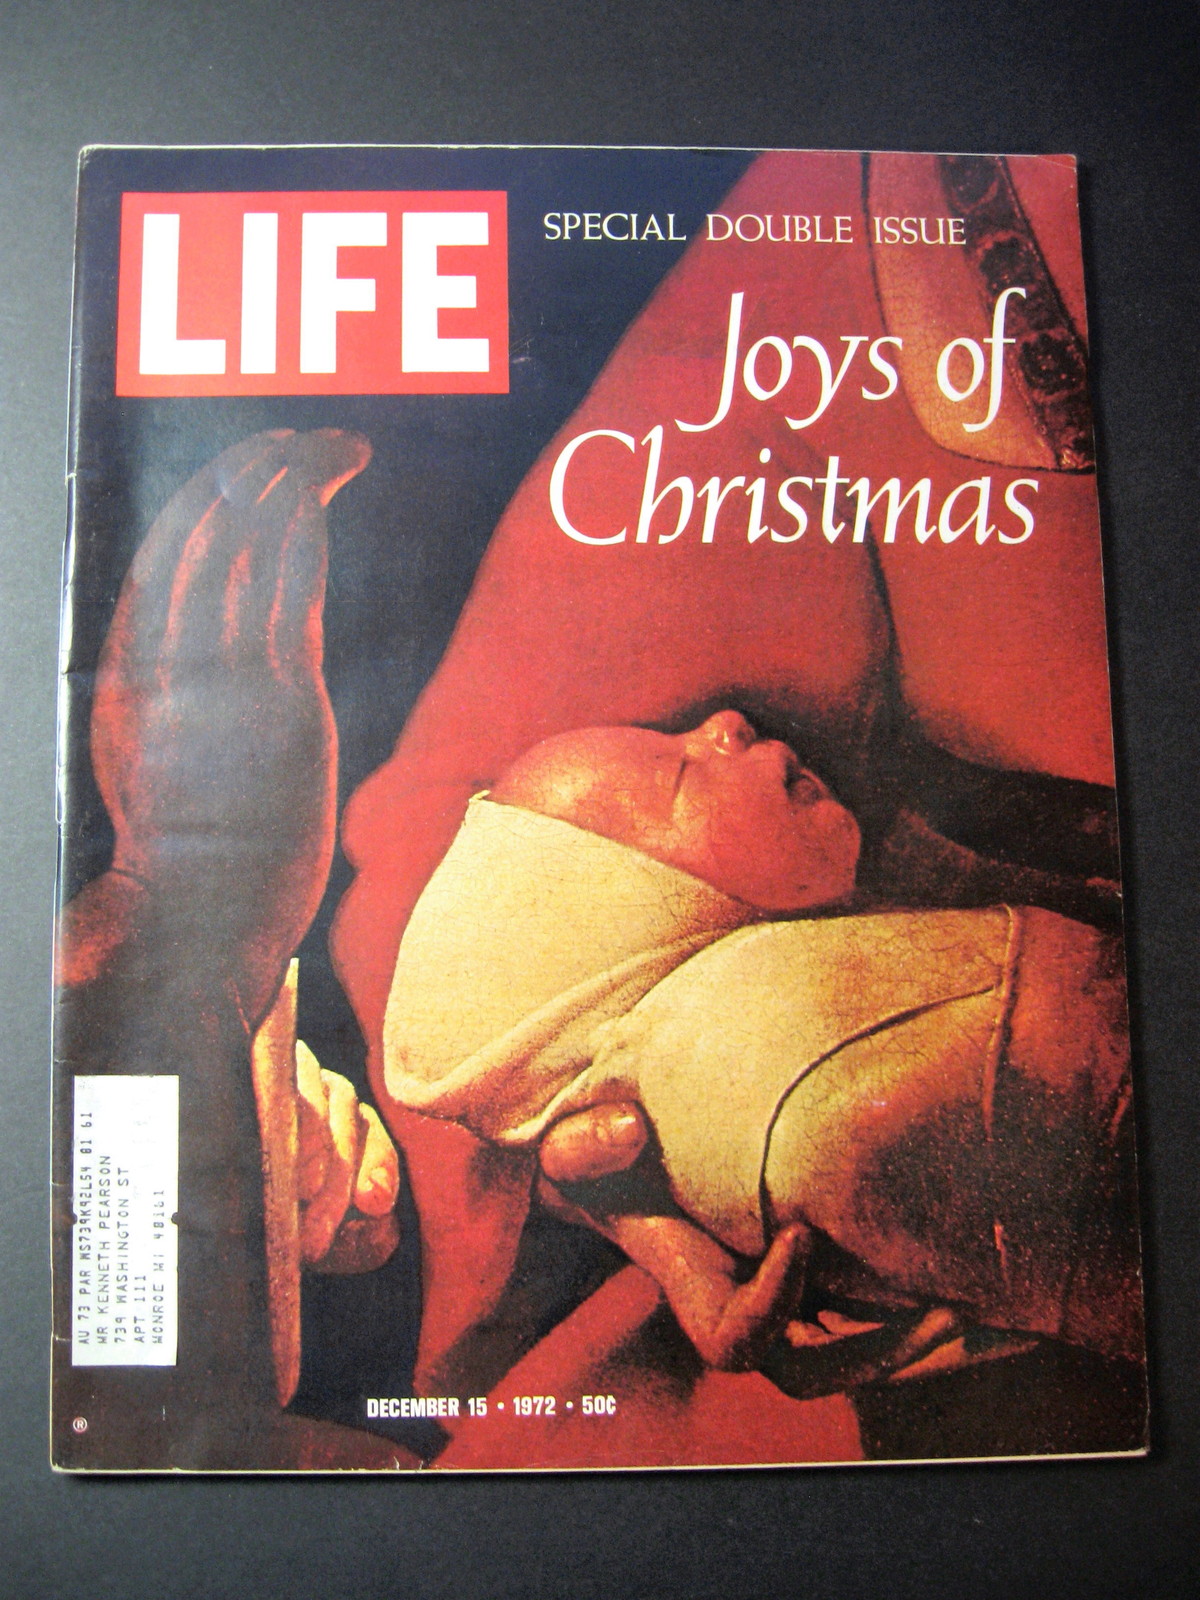 Life Magazine - December 15, 1972 - Joys of Christmas - Special Double Issue  - $10.00